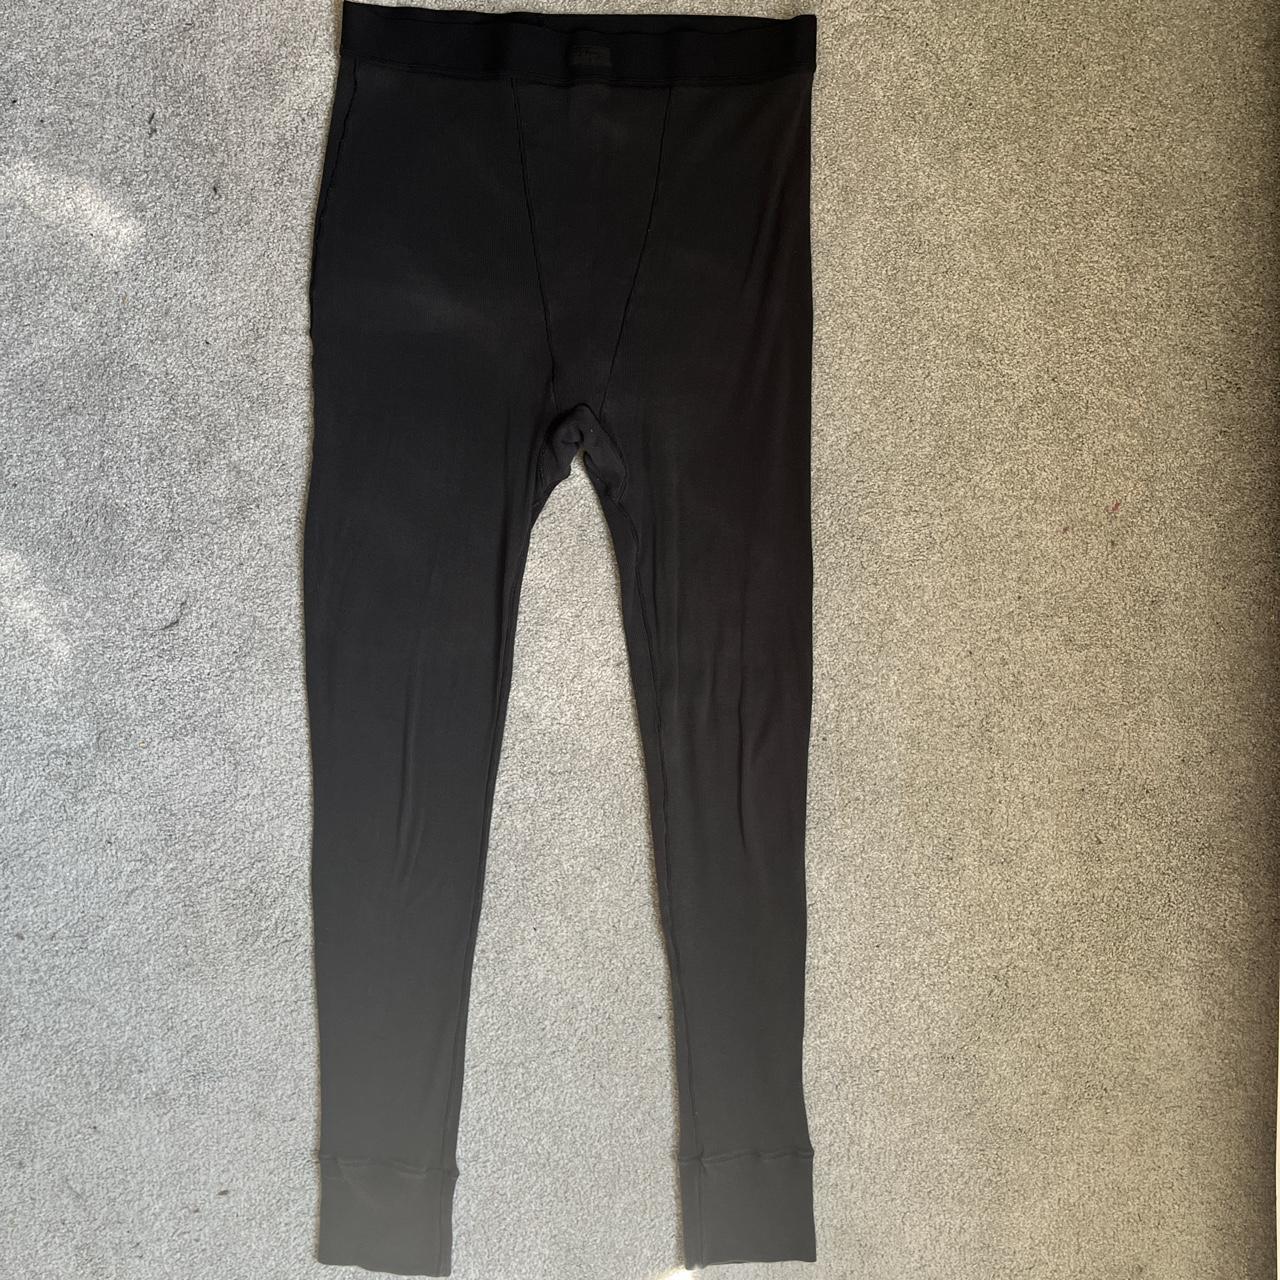 Skims Ribbed Leggings - Soot Size Large Discounted... - Depop